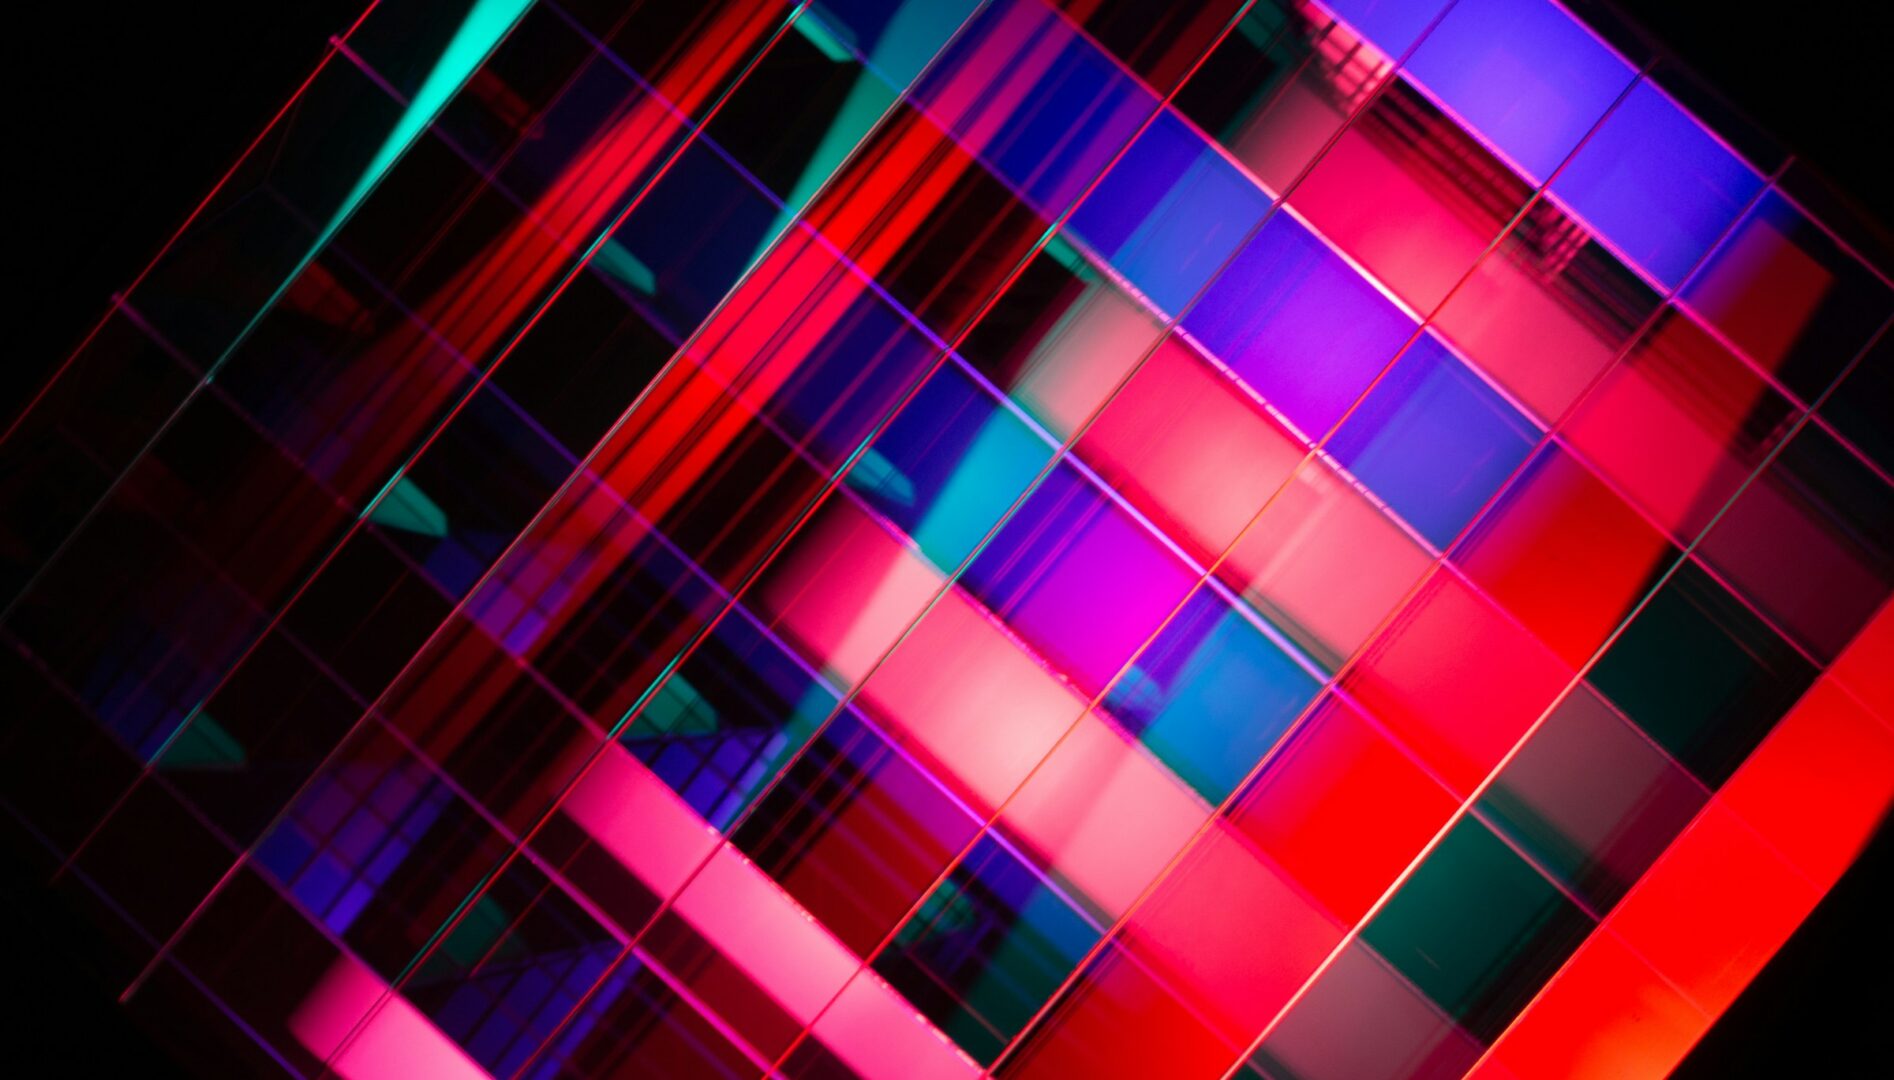 Abstract image of neon red, blue, and purple lines